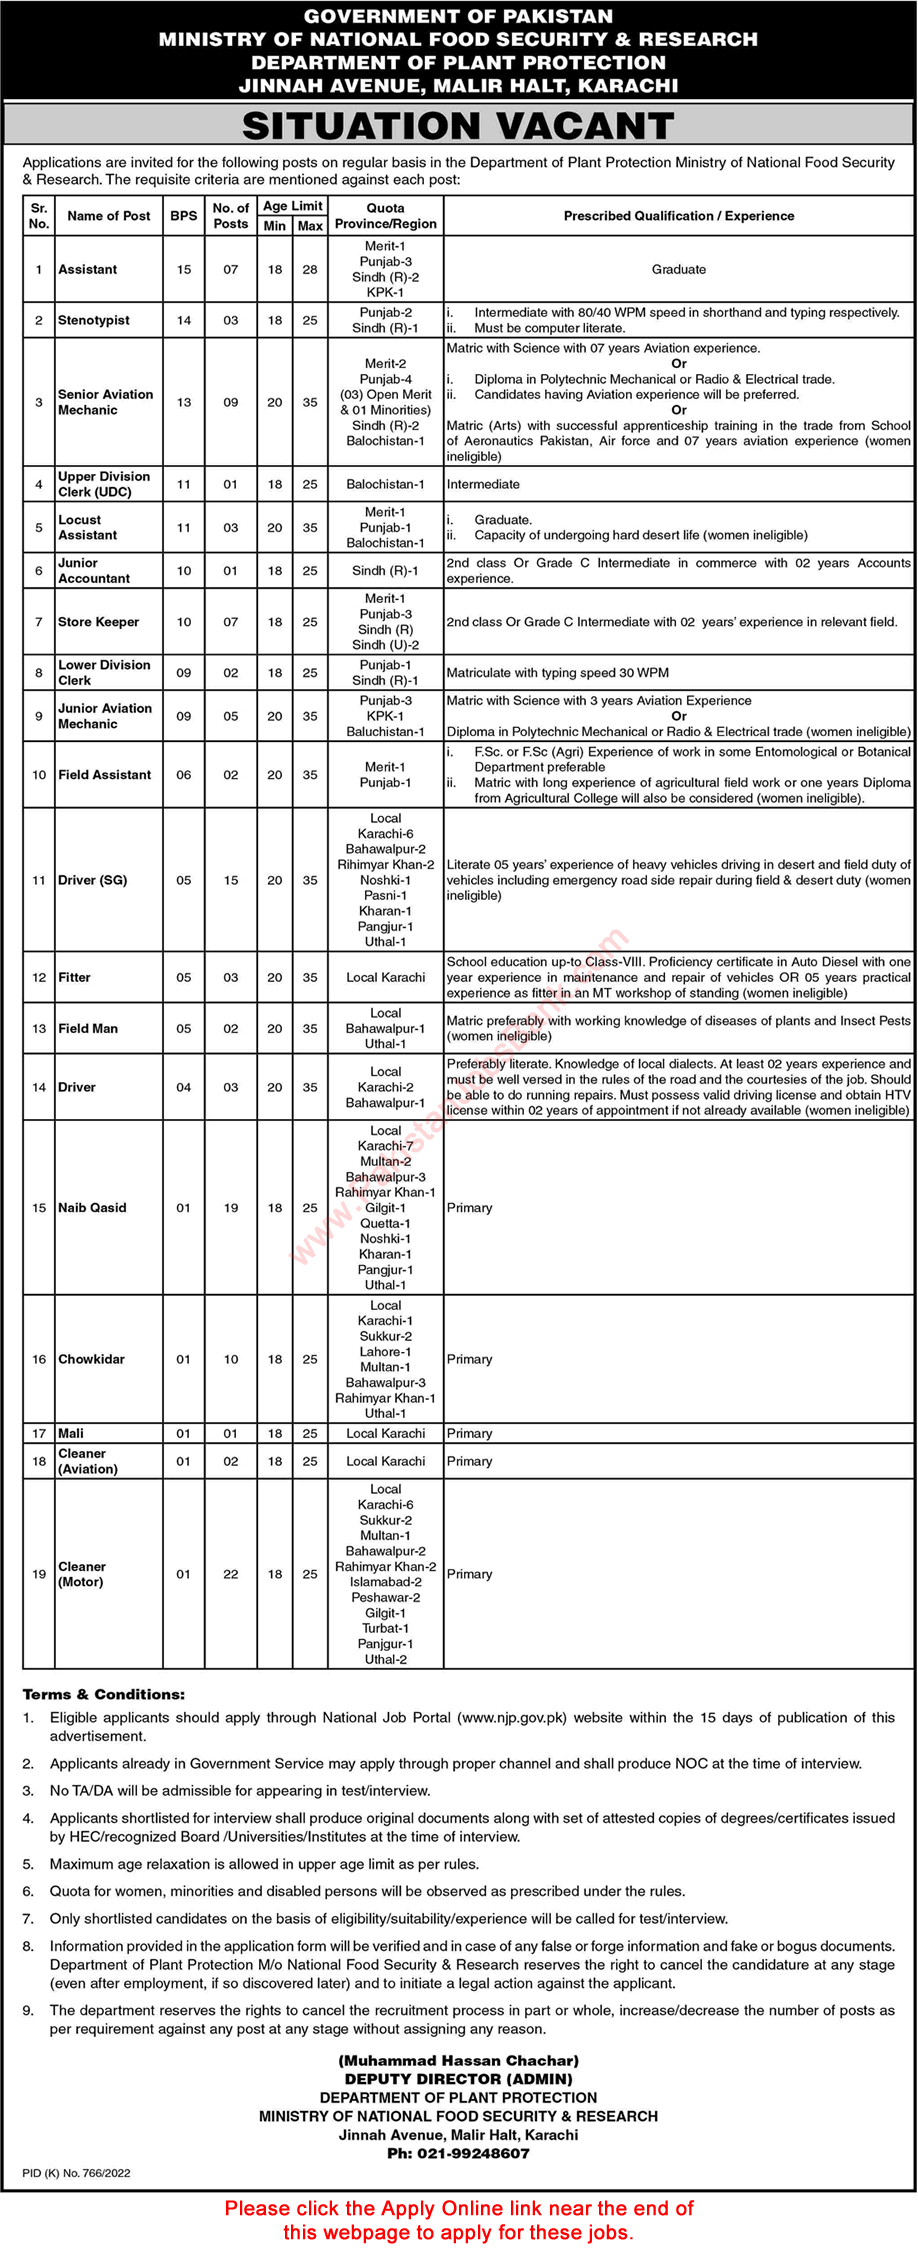 Ministry of National Food Security and Research Karachi Jobs 2022 September Apply Online Latest